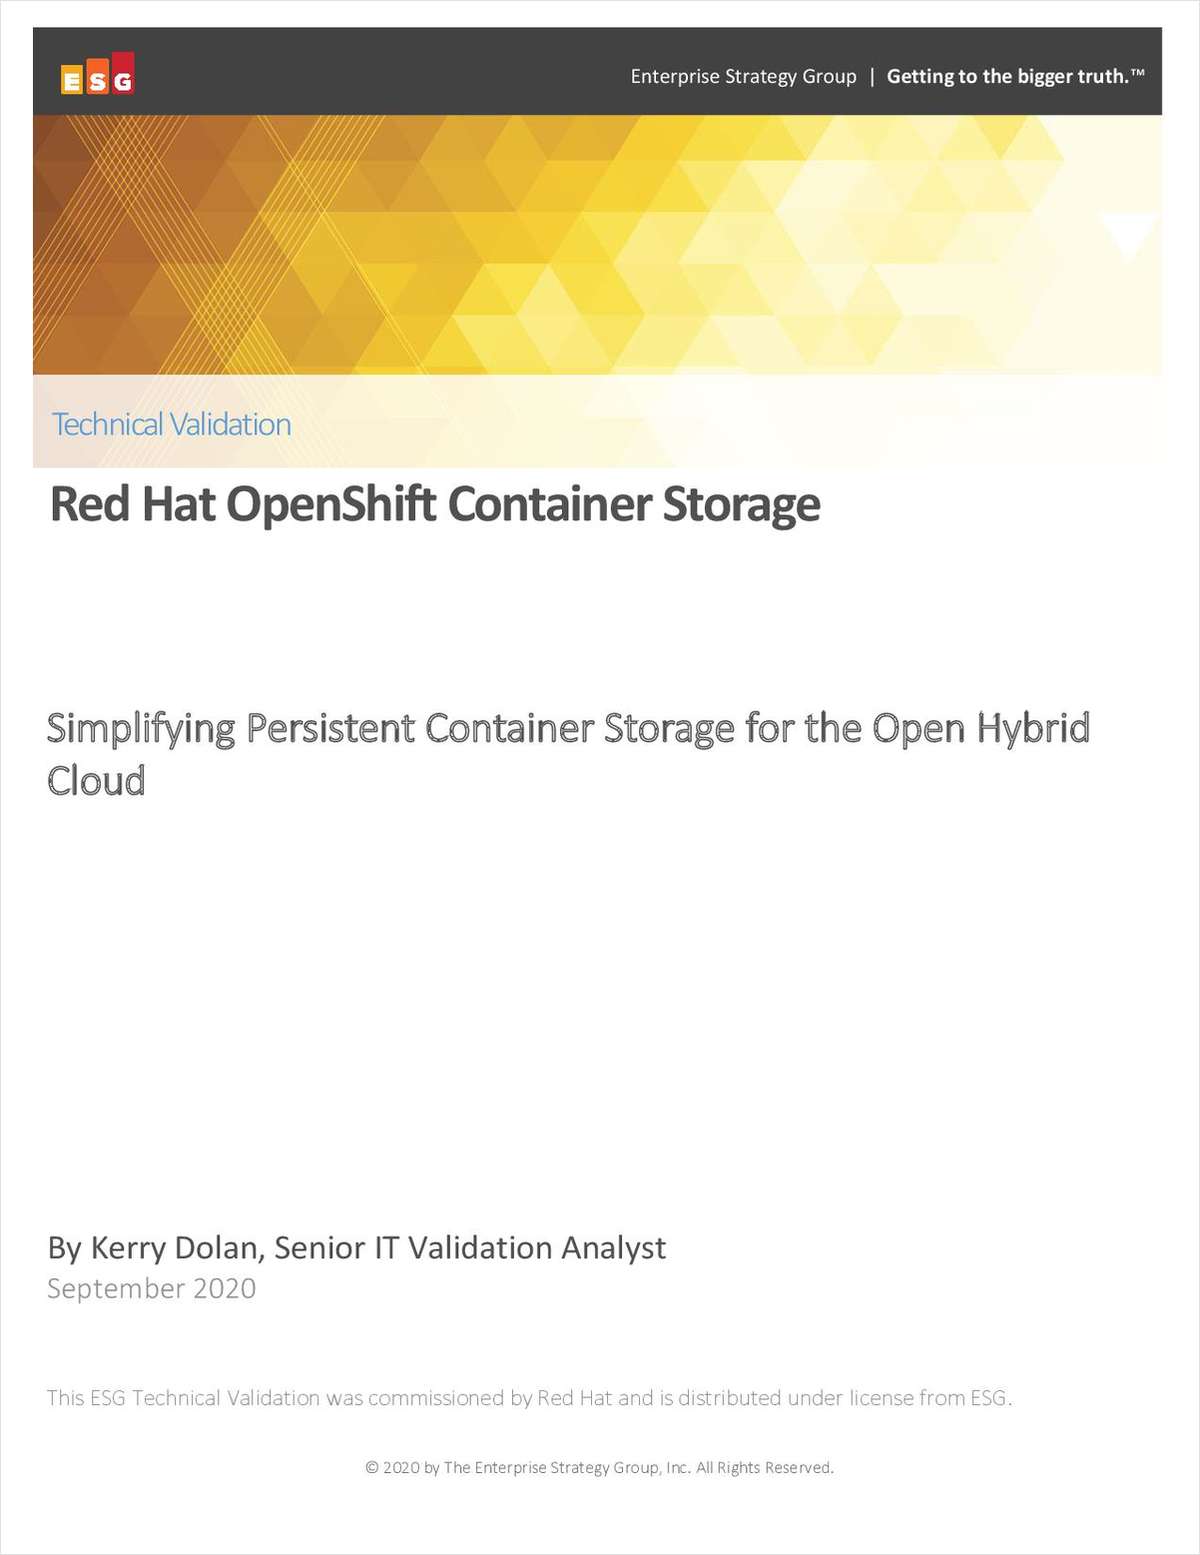 Simplifying Persistent Container Storage for the Open Hybrid Cloud